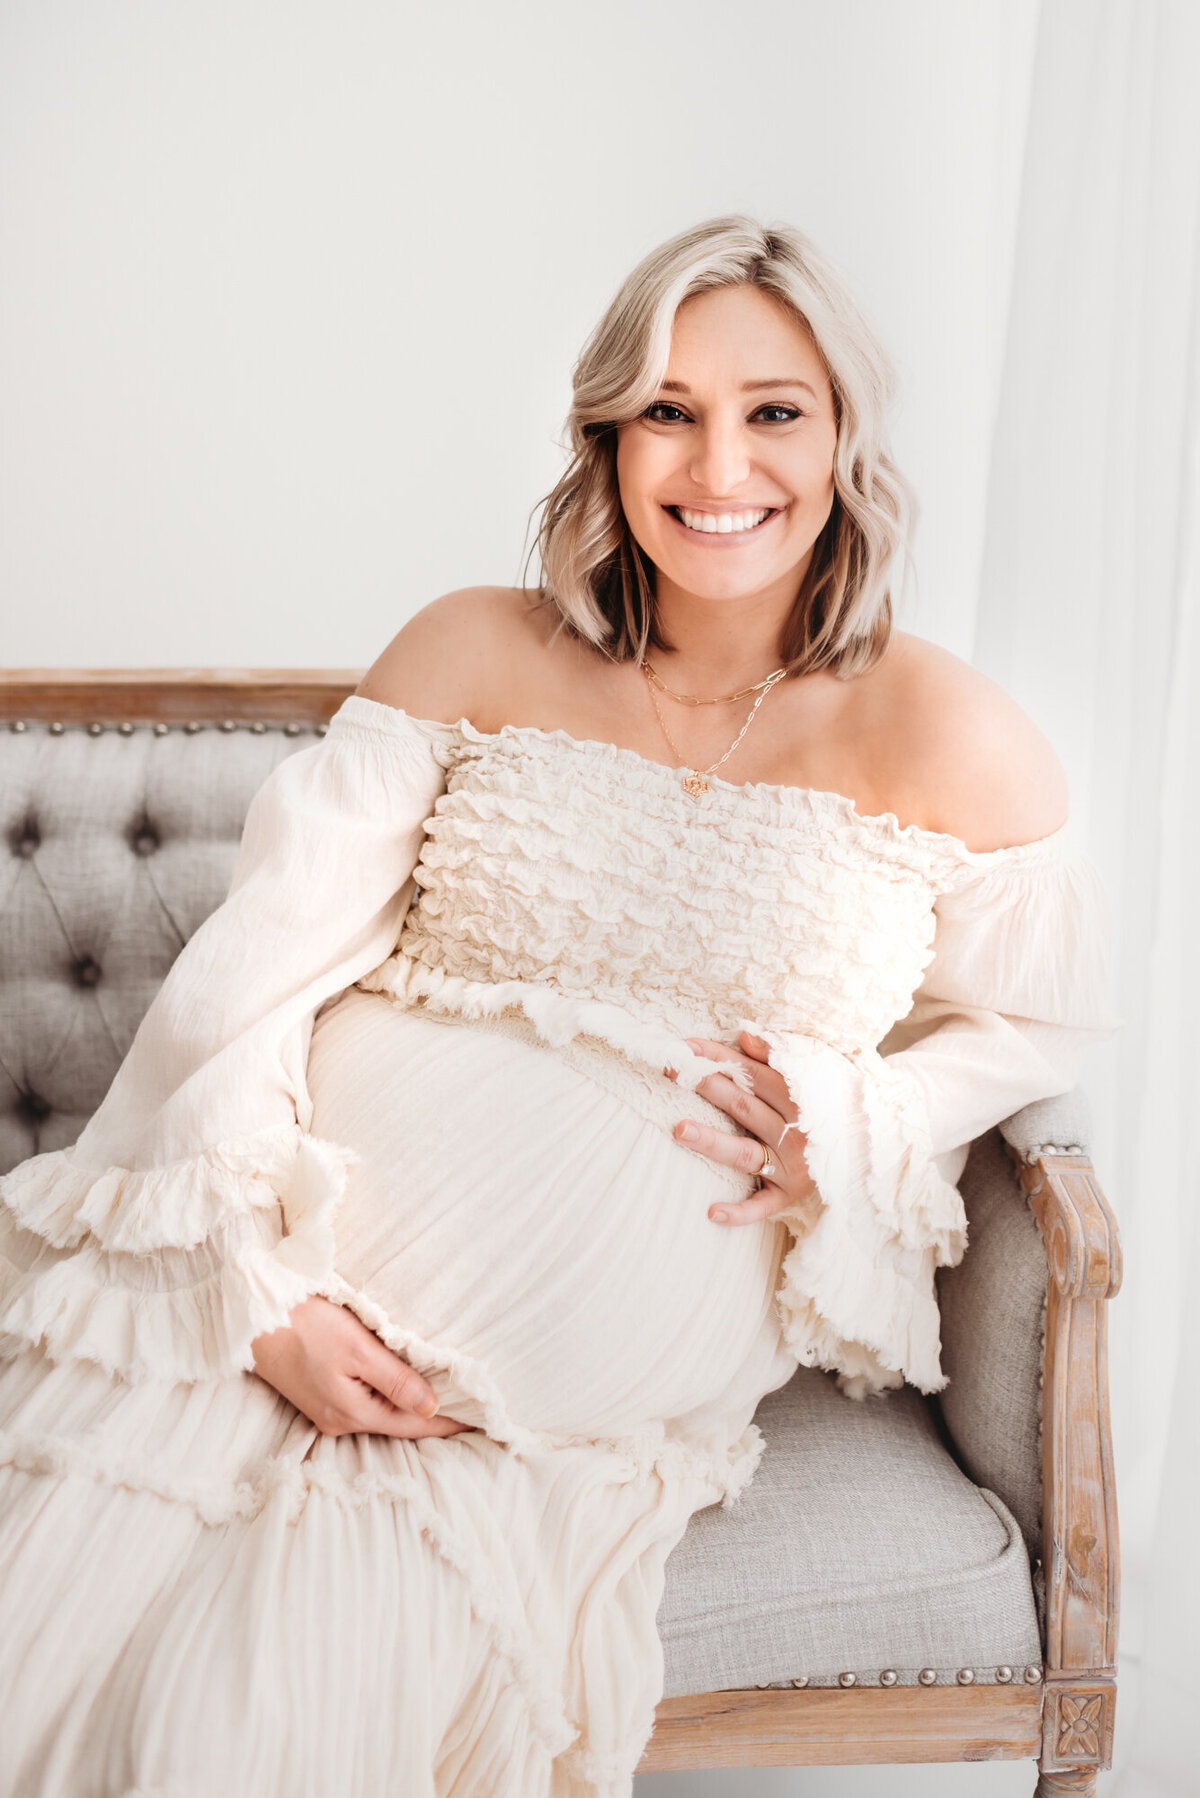 pregnant woman smiling at camera and holding her belly in white studio